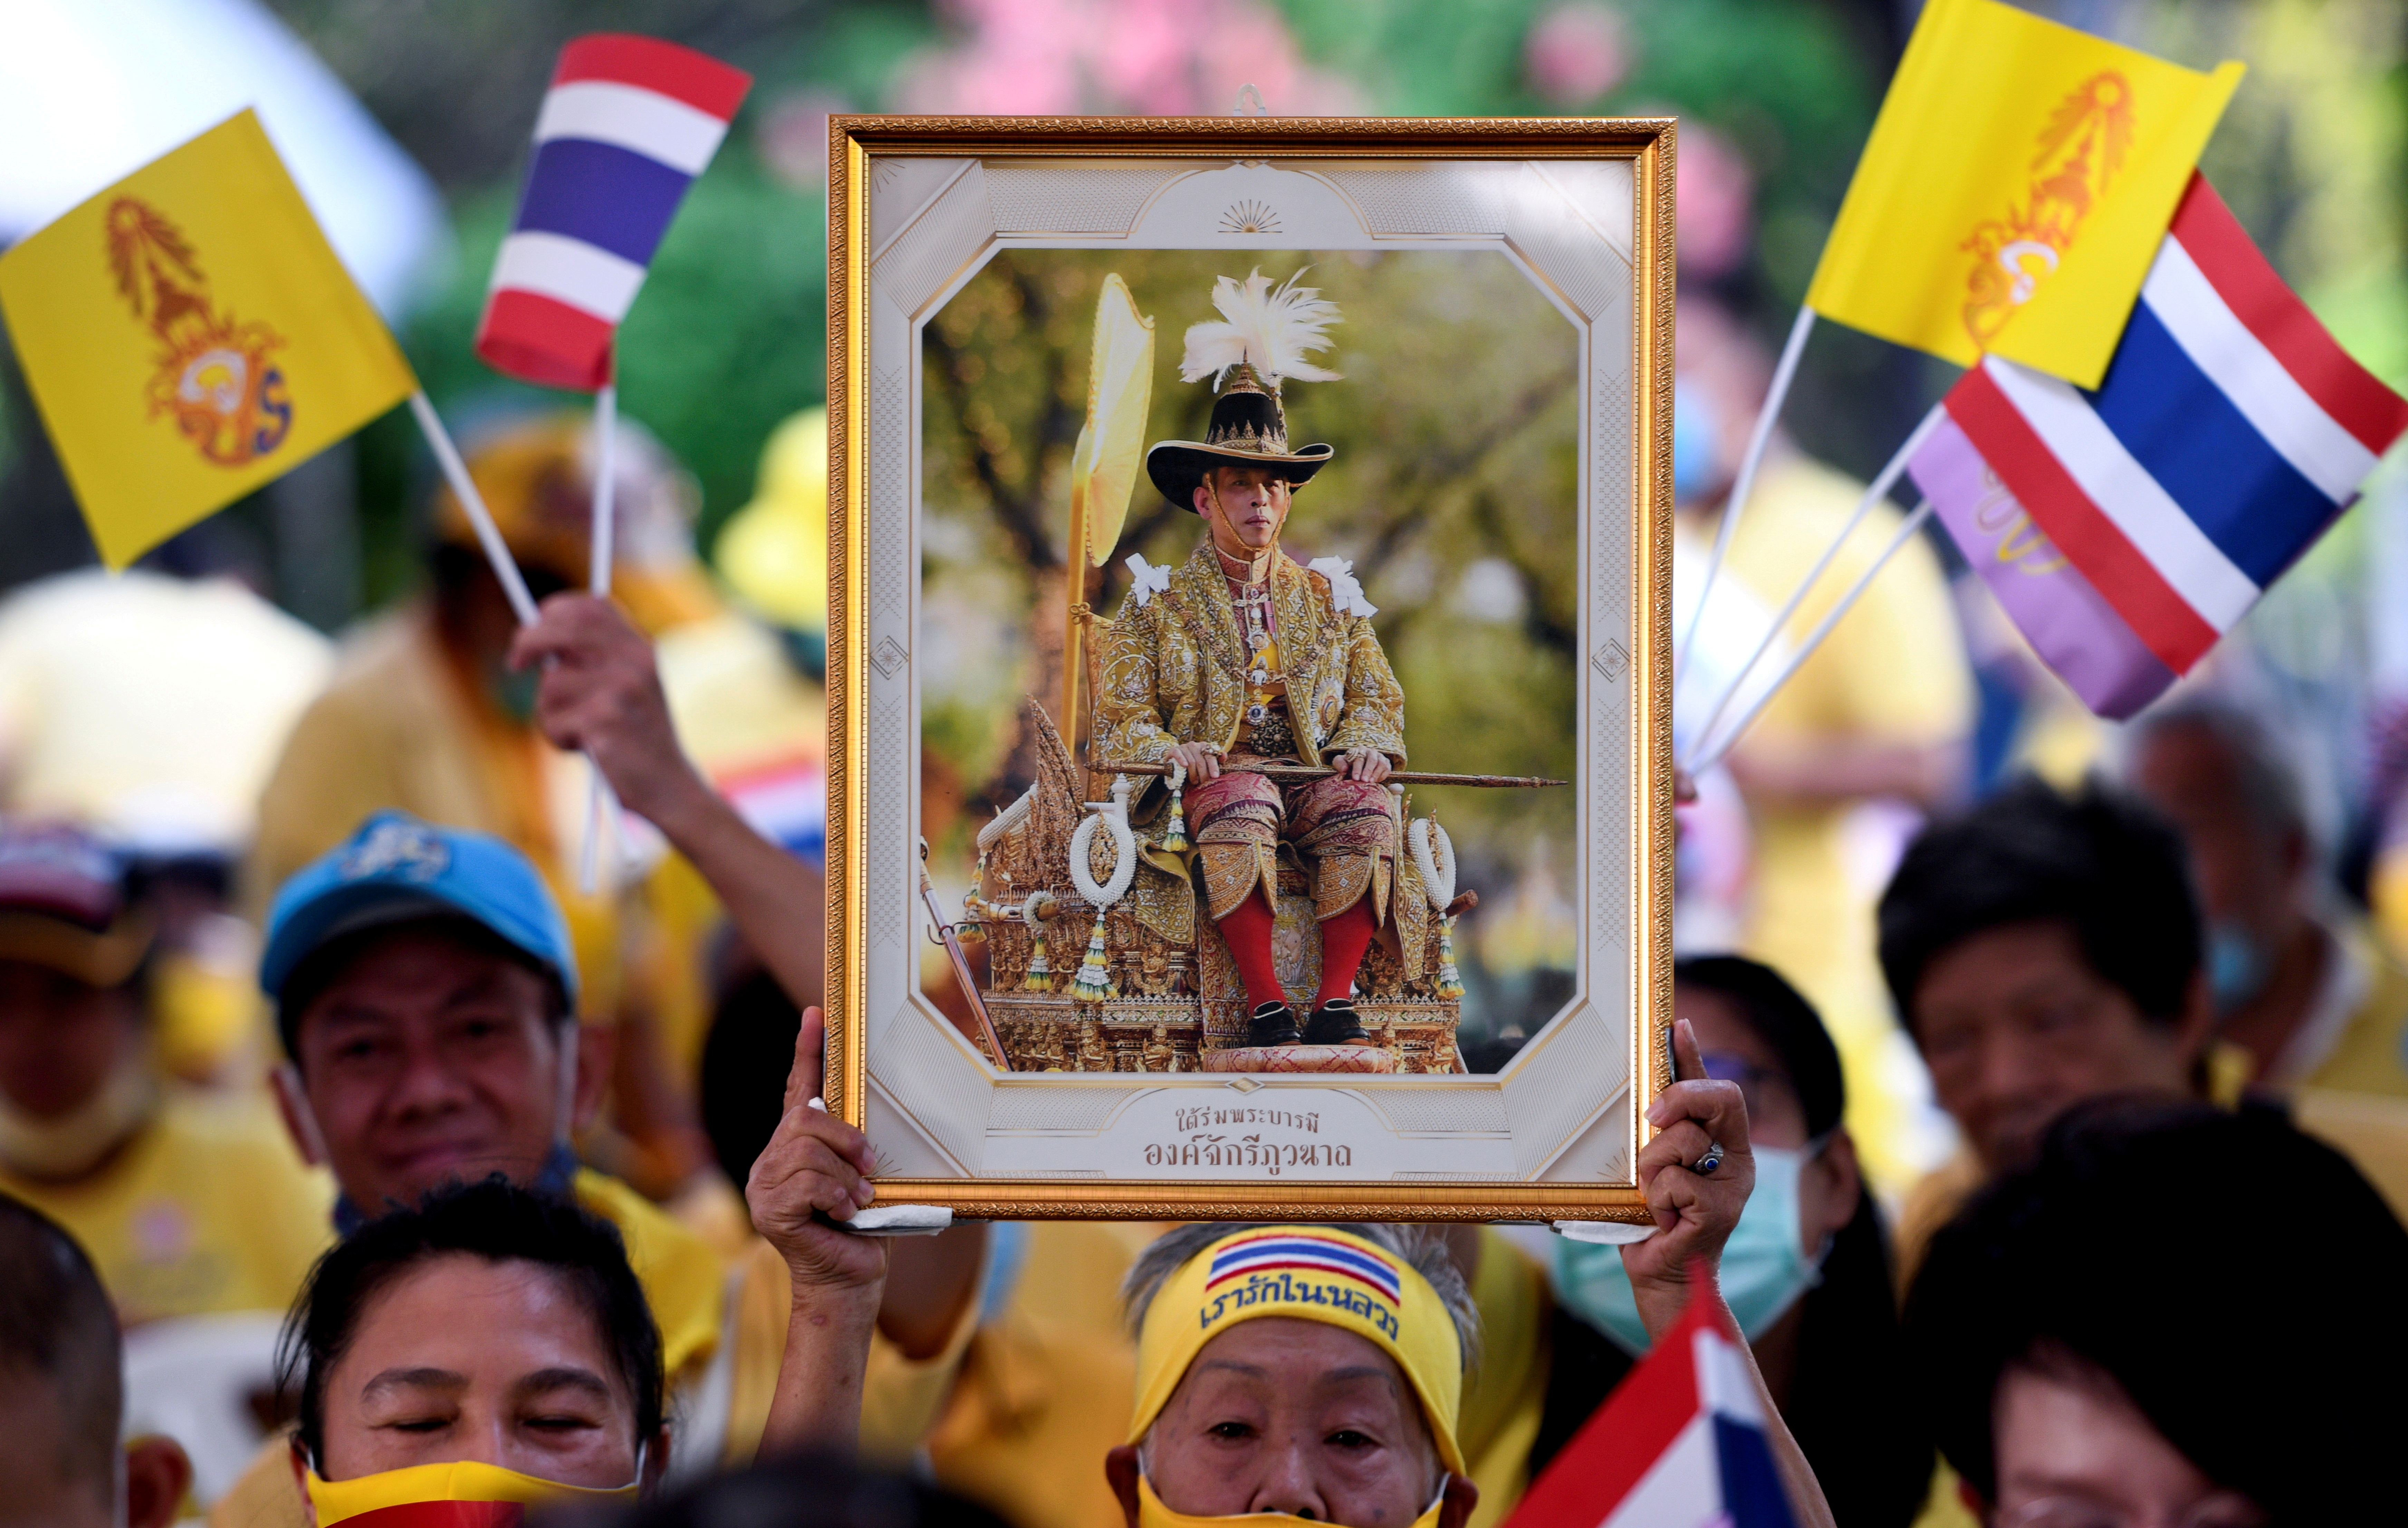 A person holds a portrait of Thailand's King Maha Vajiralongkorn, as royalists wait for the arrival of royal couple, in Bangkok, Thailand, November 25, 2020